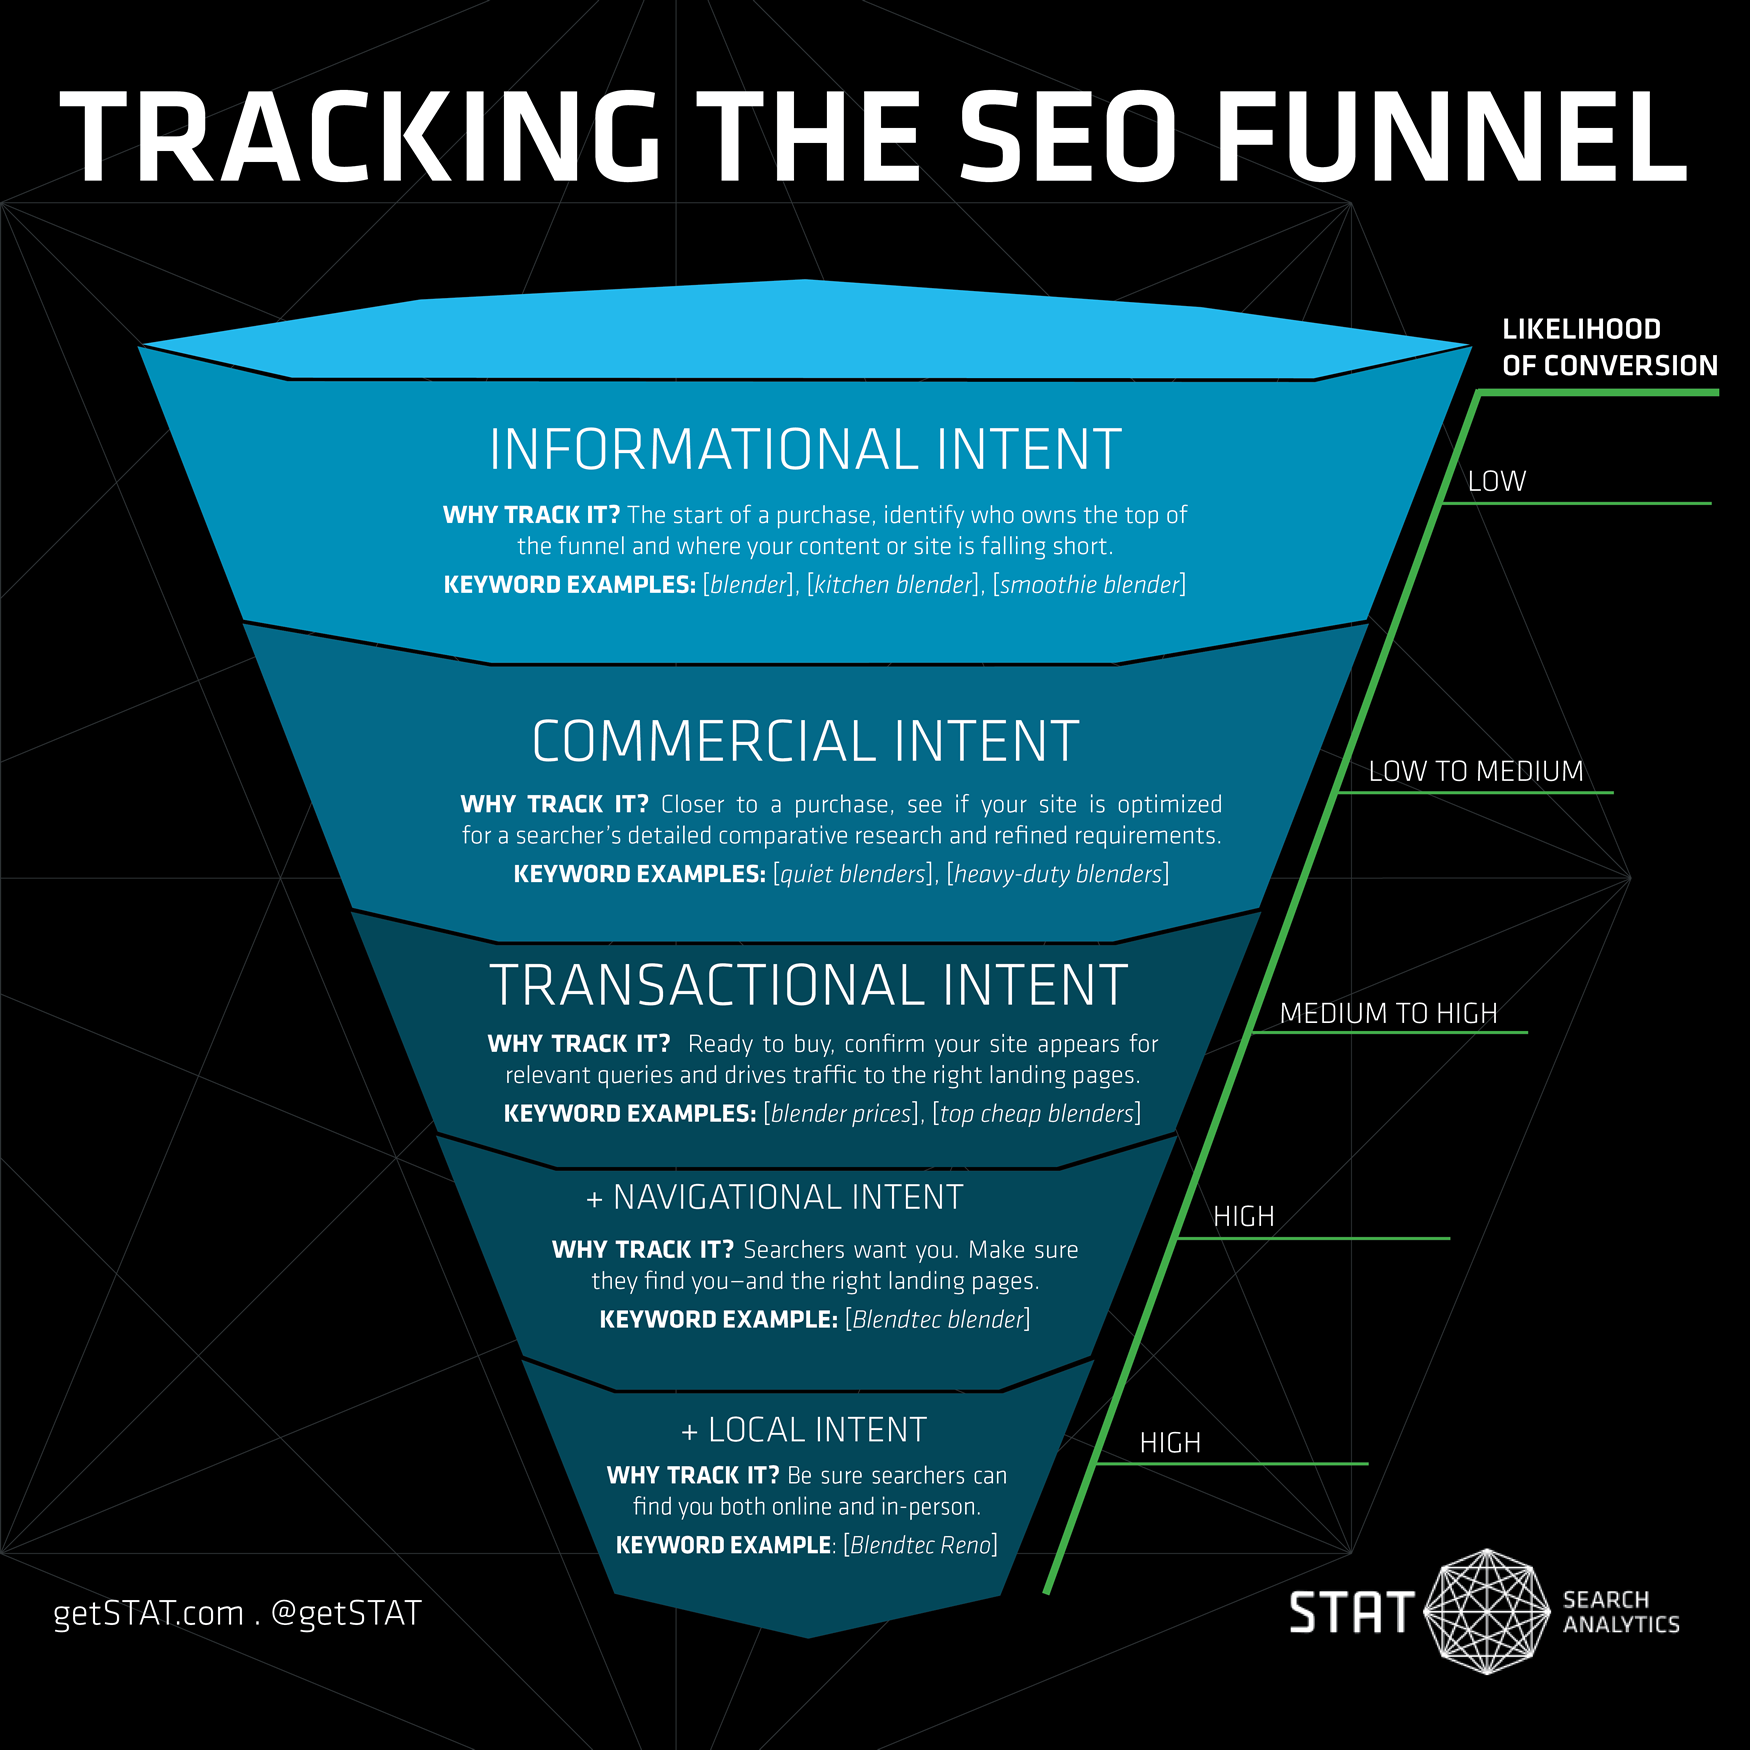 Tracking-the-SEO-funnel